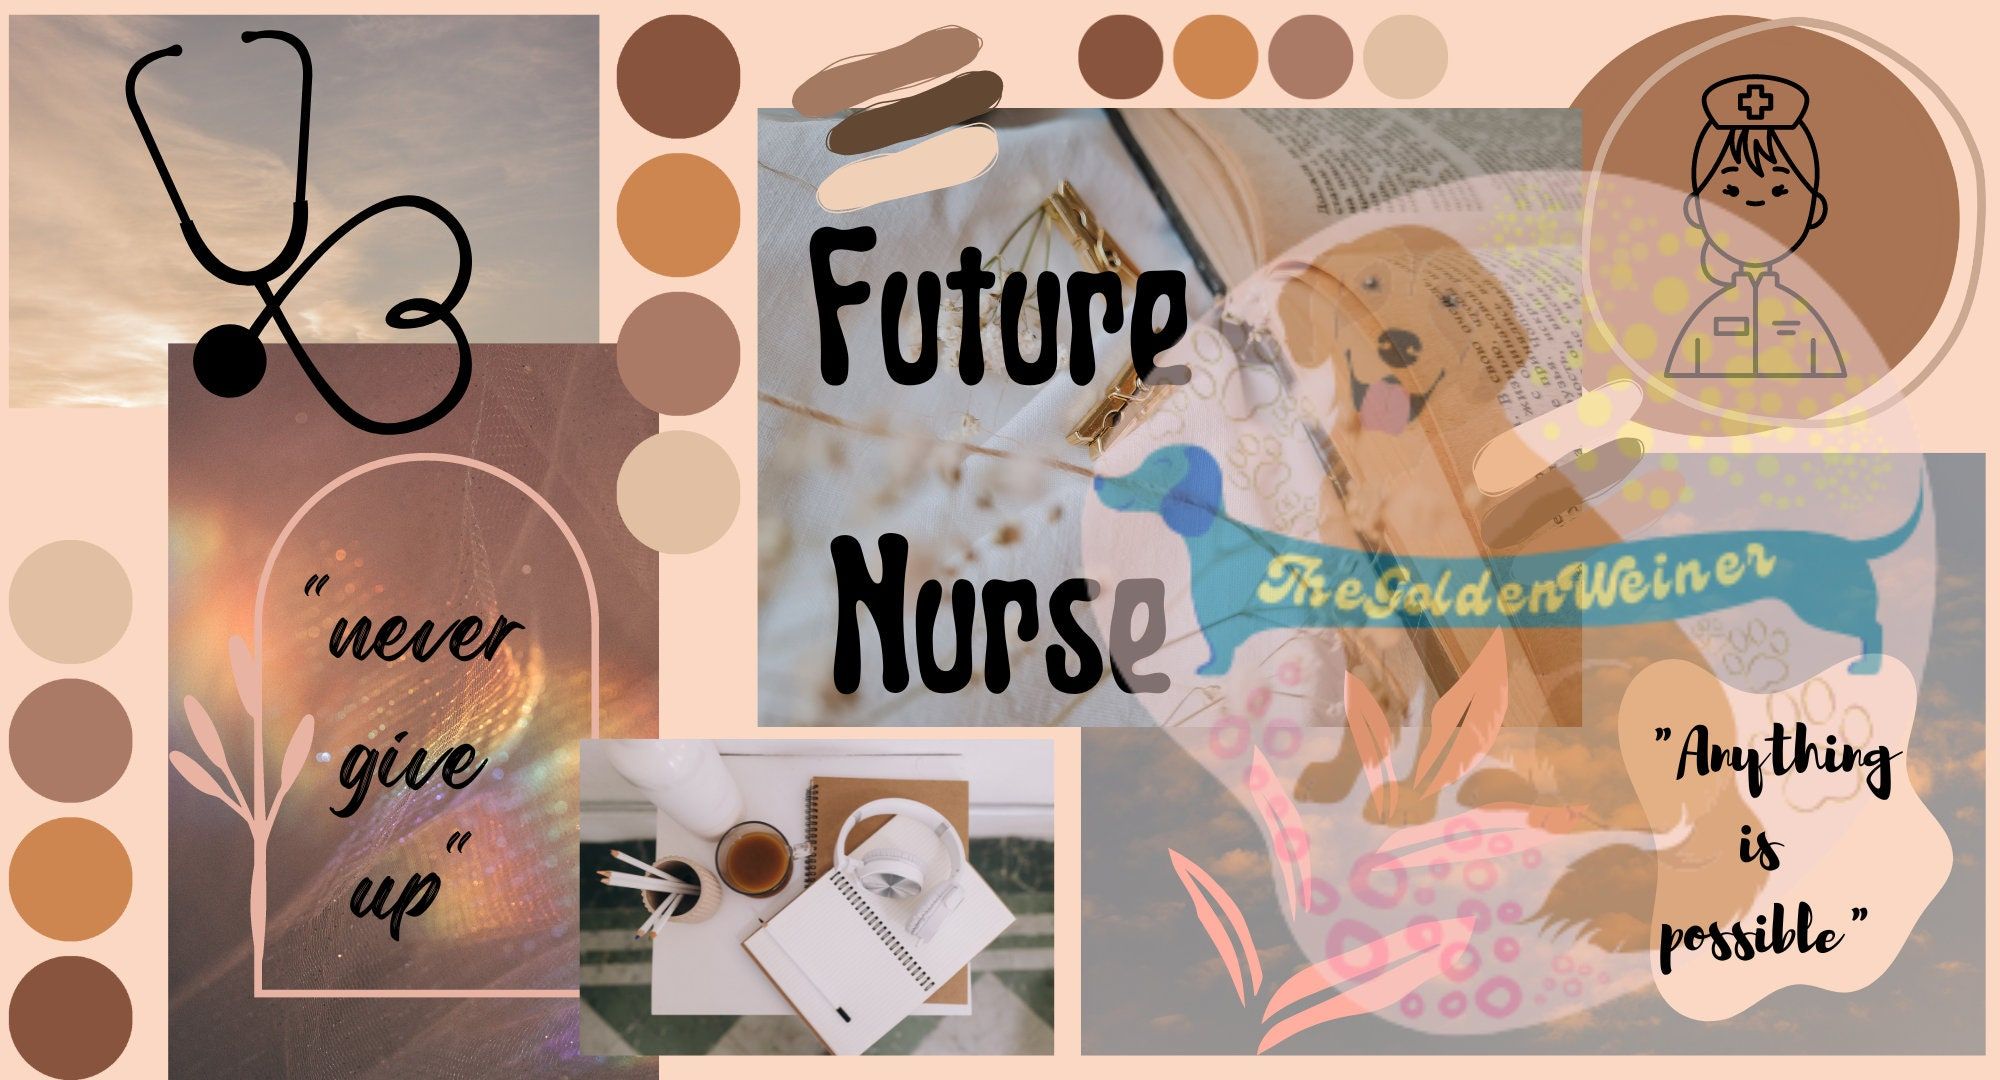 A collage of images including a stethoscope, a book, a dog, and a coffee cup. - Nurse